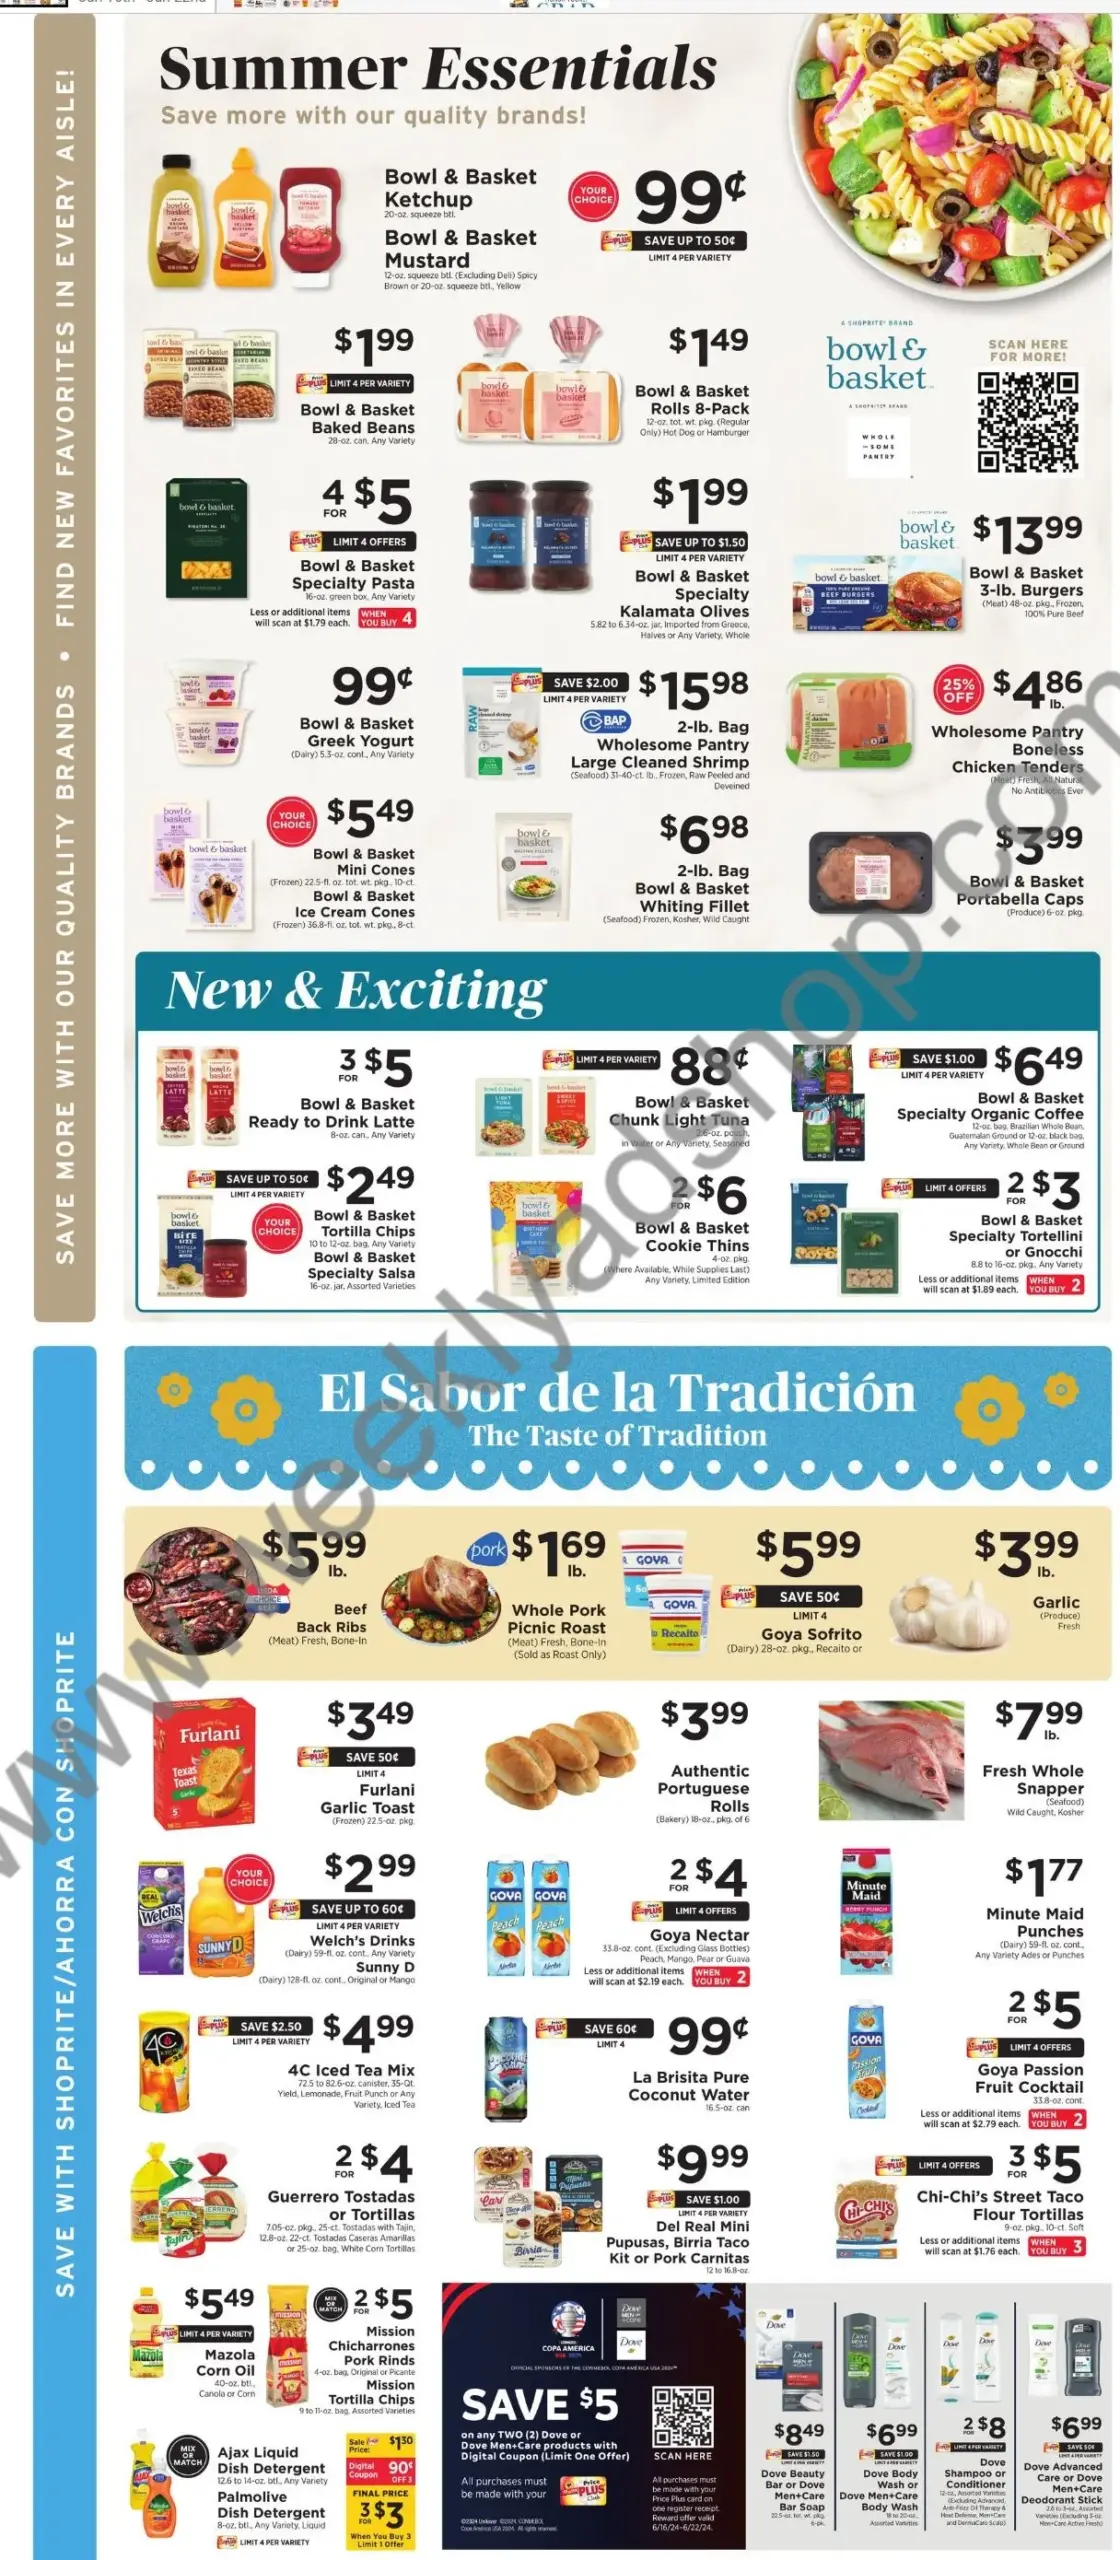 Shoprite July 2024 Weekly Sales, Deals, Discounts and Digital Coupons.